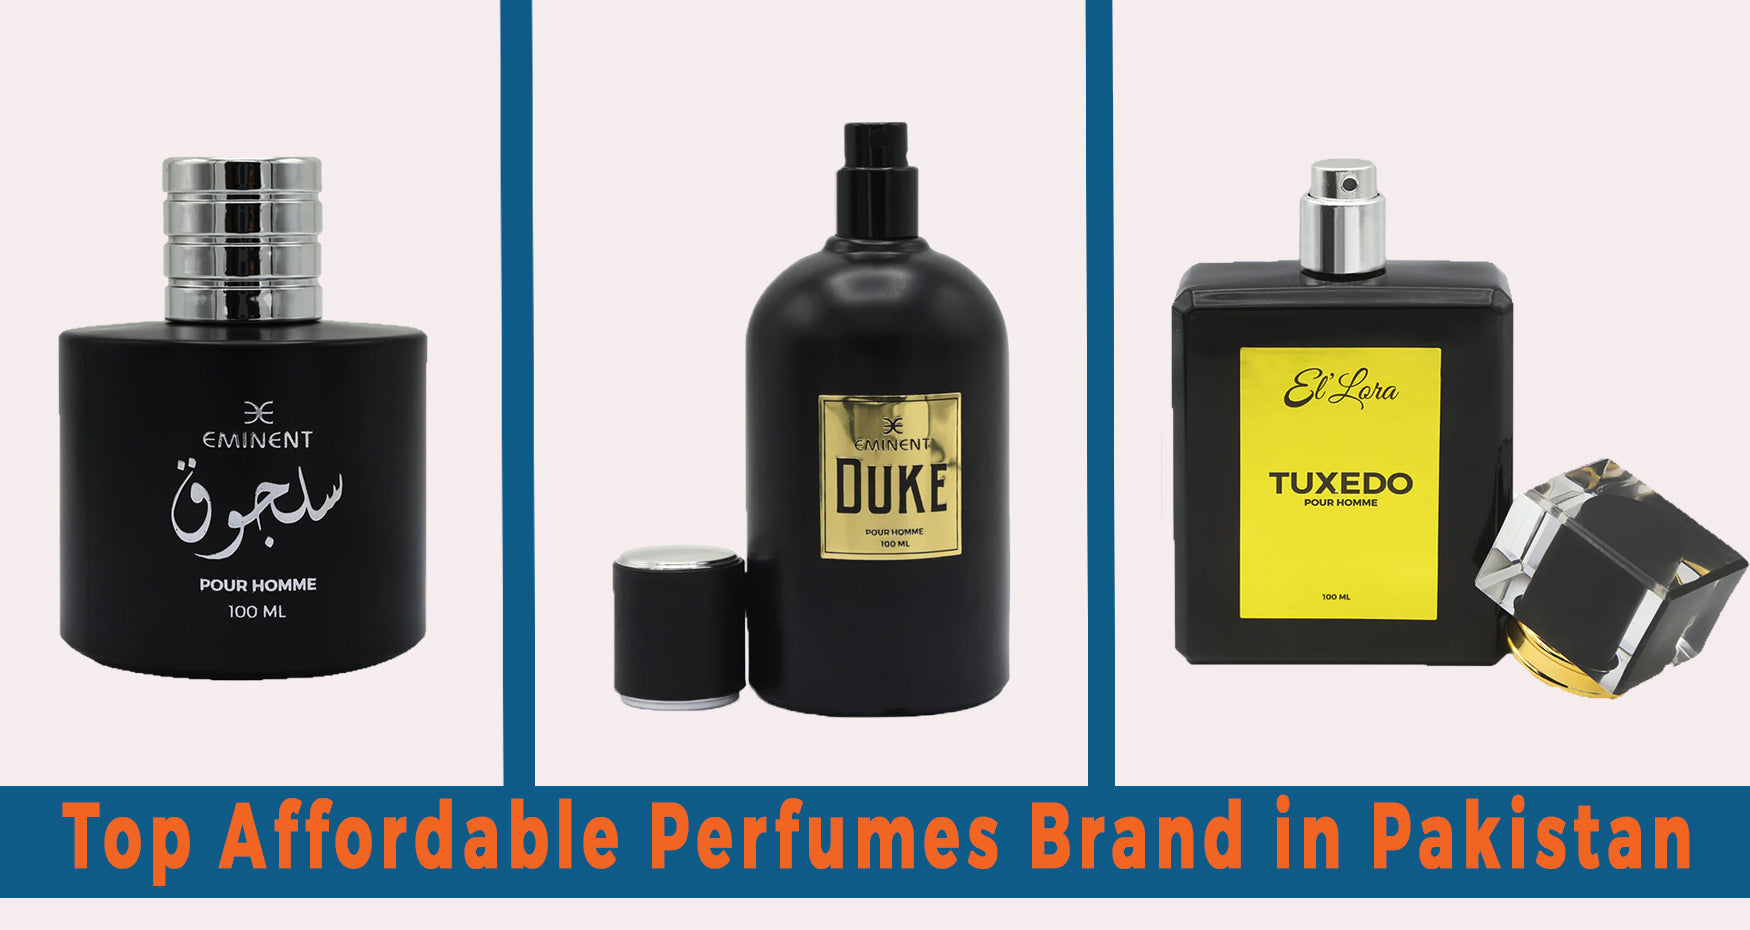 Top 5 Affordable Perfumes in Pakistan